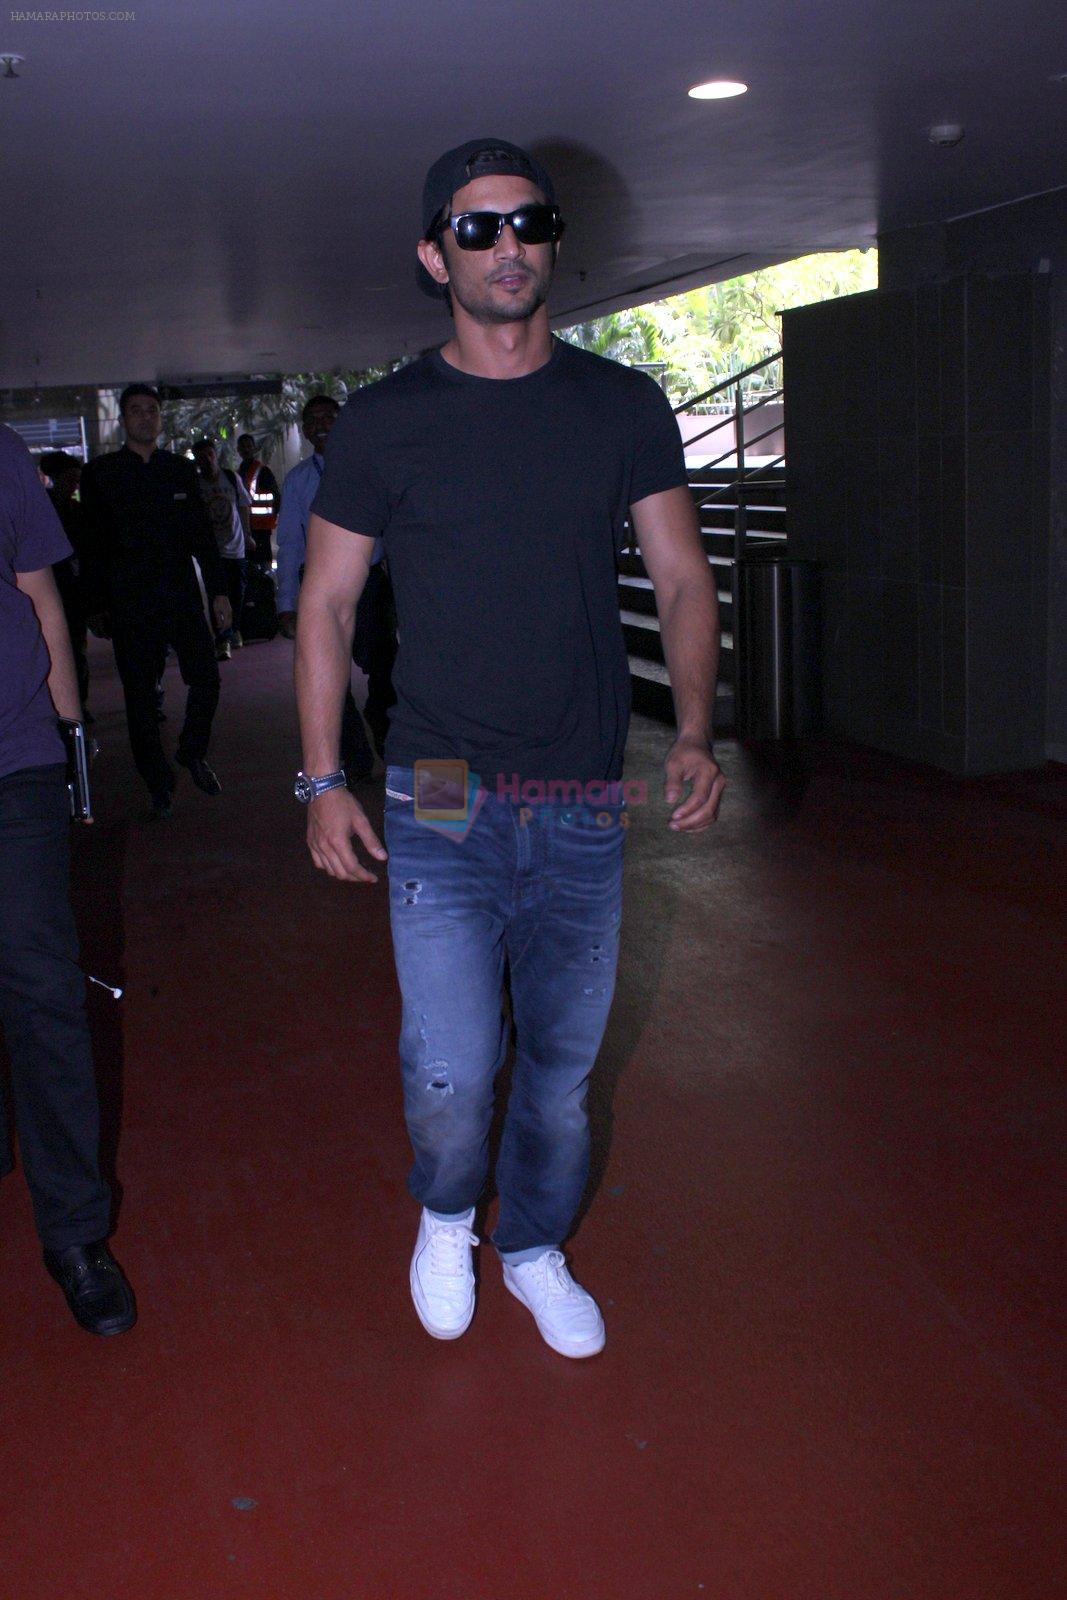 Sushant Singh Rajput snapped at airport on 20th March 2016